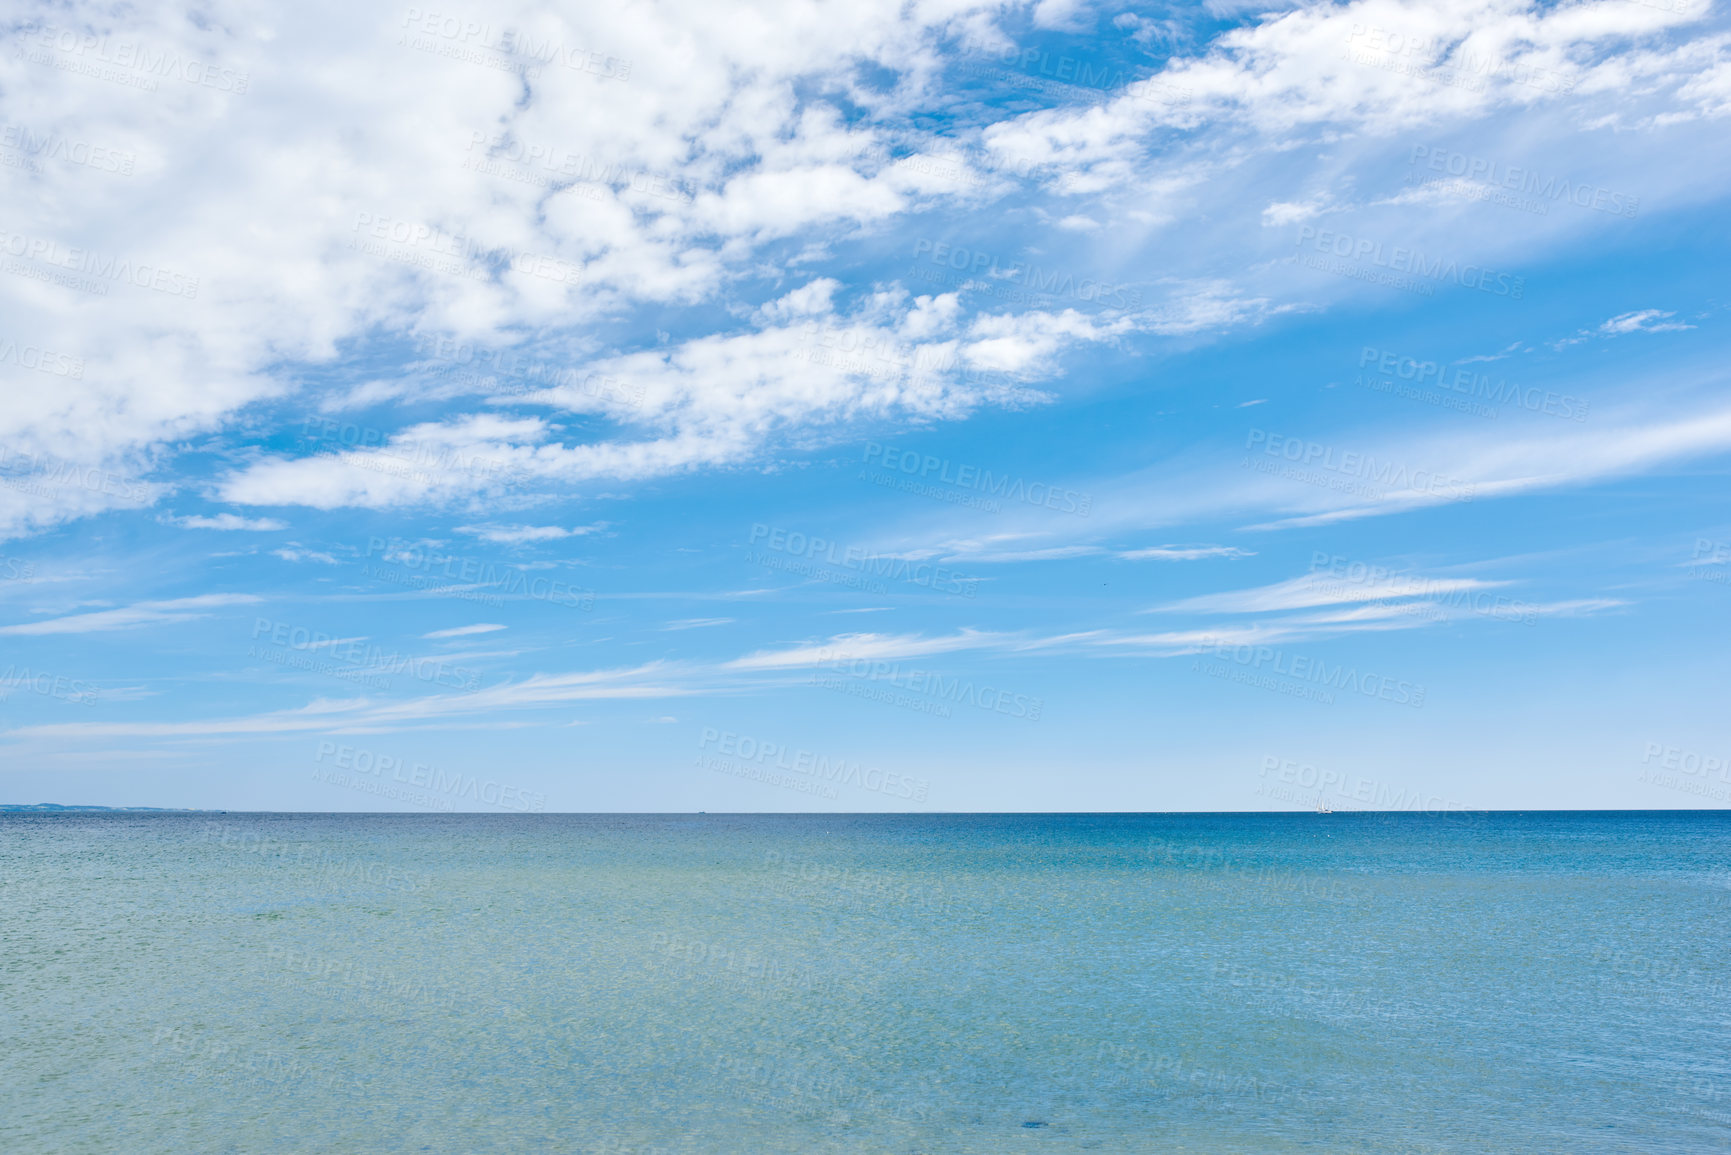 Buy stock photo Copy space at sea with a cloudy blue sky background. Calm water surface across an empty ocean across the horizon. Scenic and tranquil seascape panorama view for a peaceful summer getaway in nature